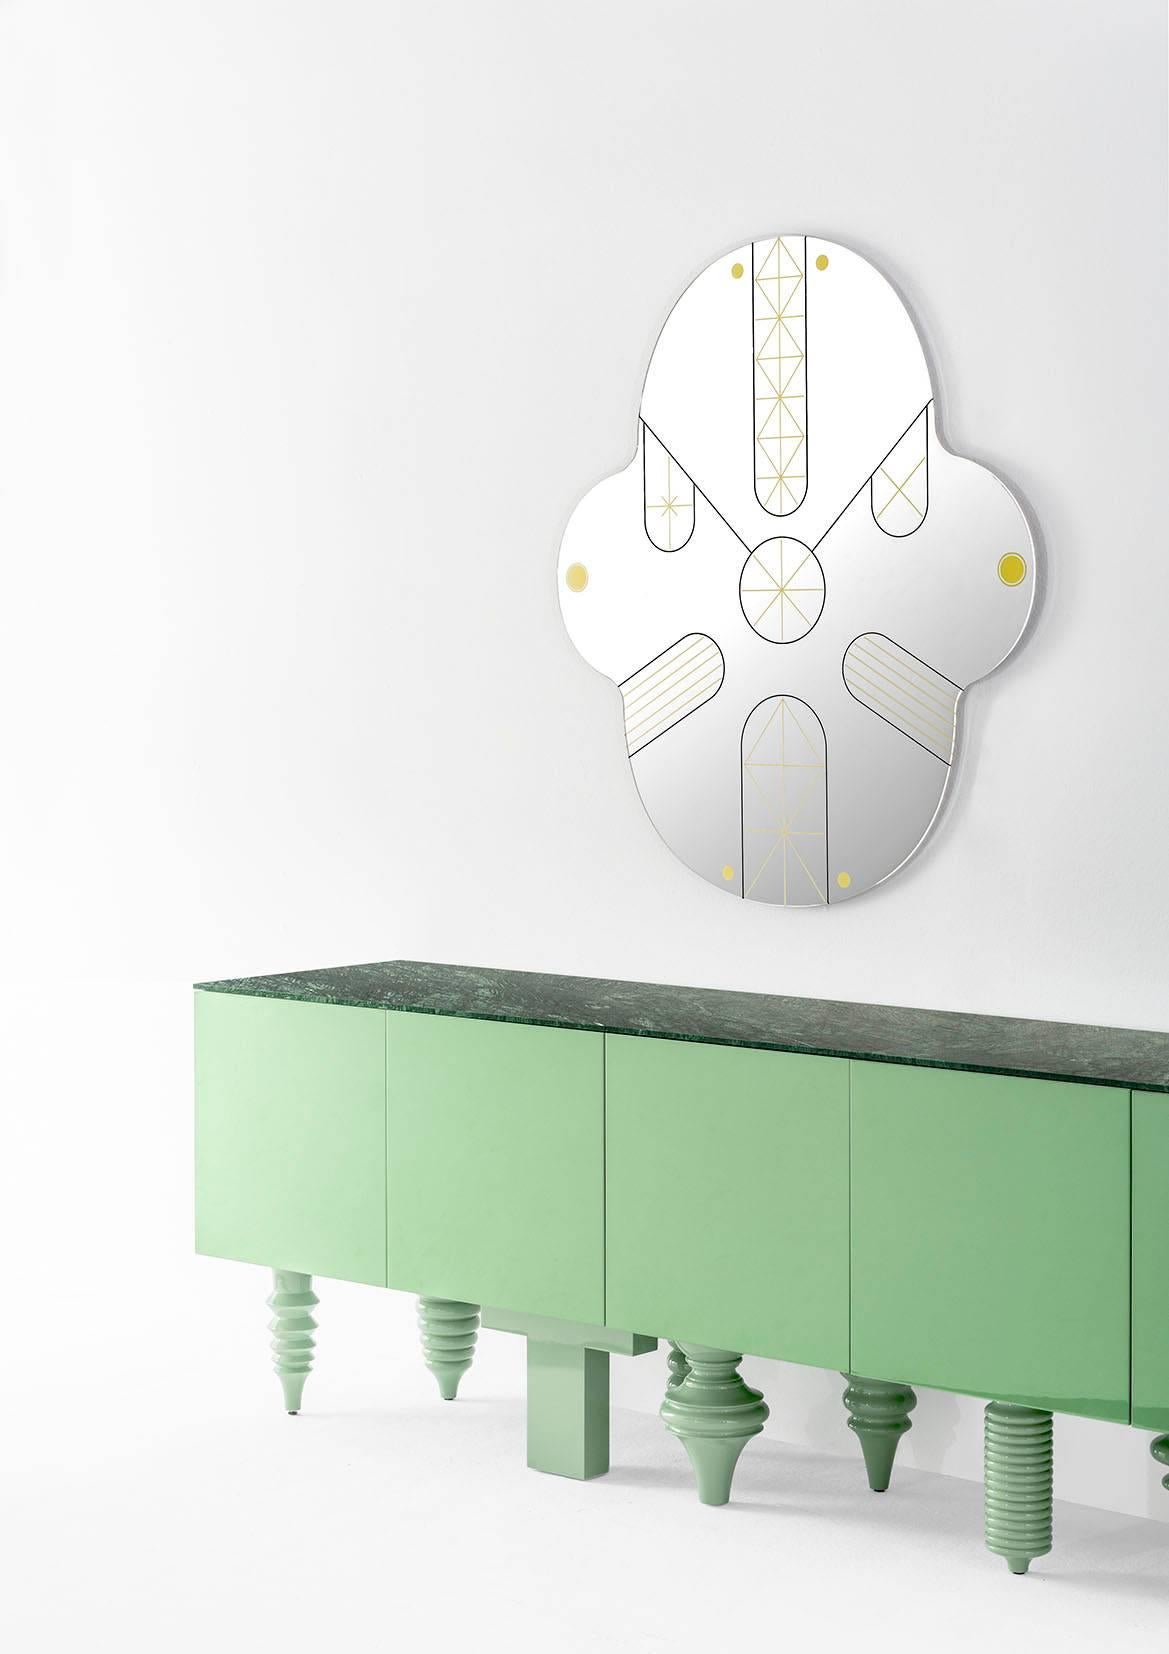 When we asked Jaime Hayon to design a new mirror for BD, he came up with two proposals. We liked them so much that we decided to produce the both of them. Two faces (King and Kong) in sizes: 90cm and 120cm.

Decorative patterns are applied in gold